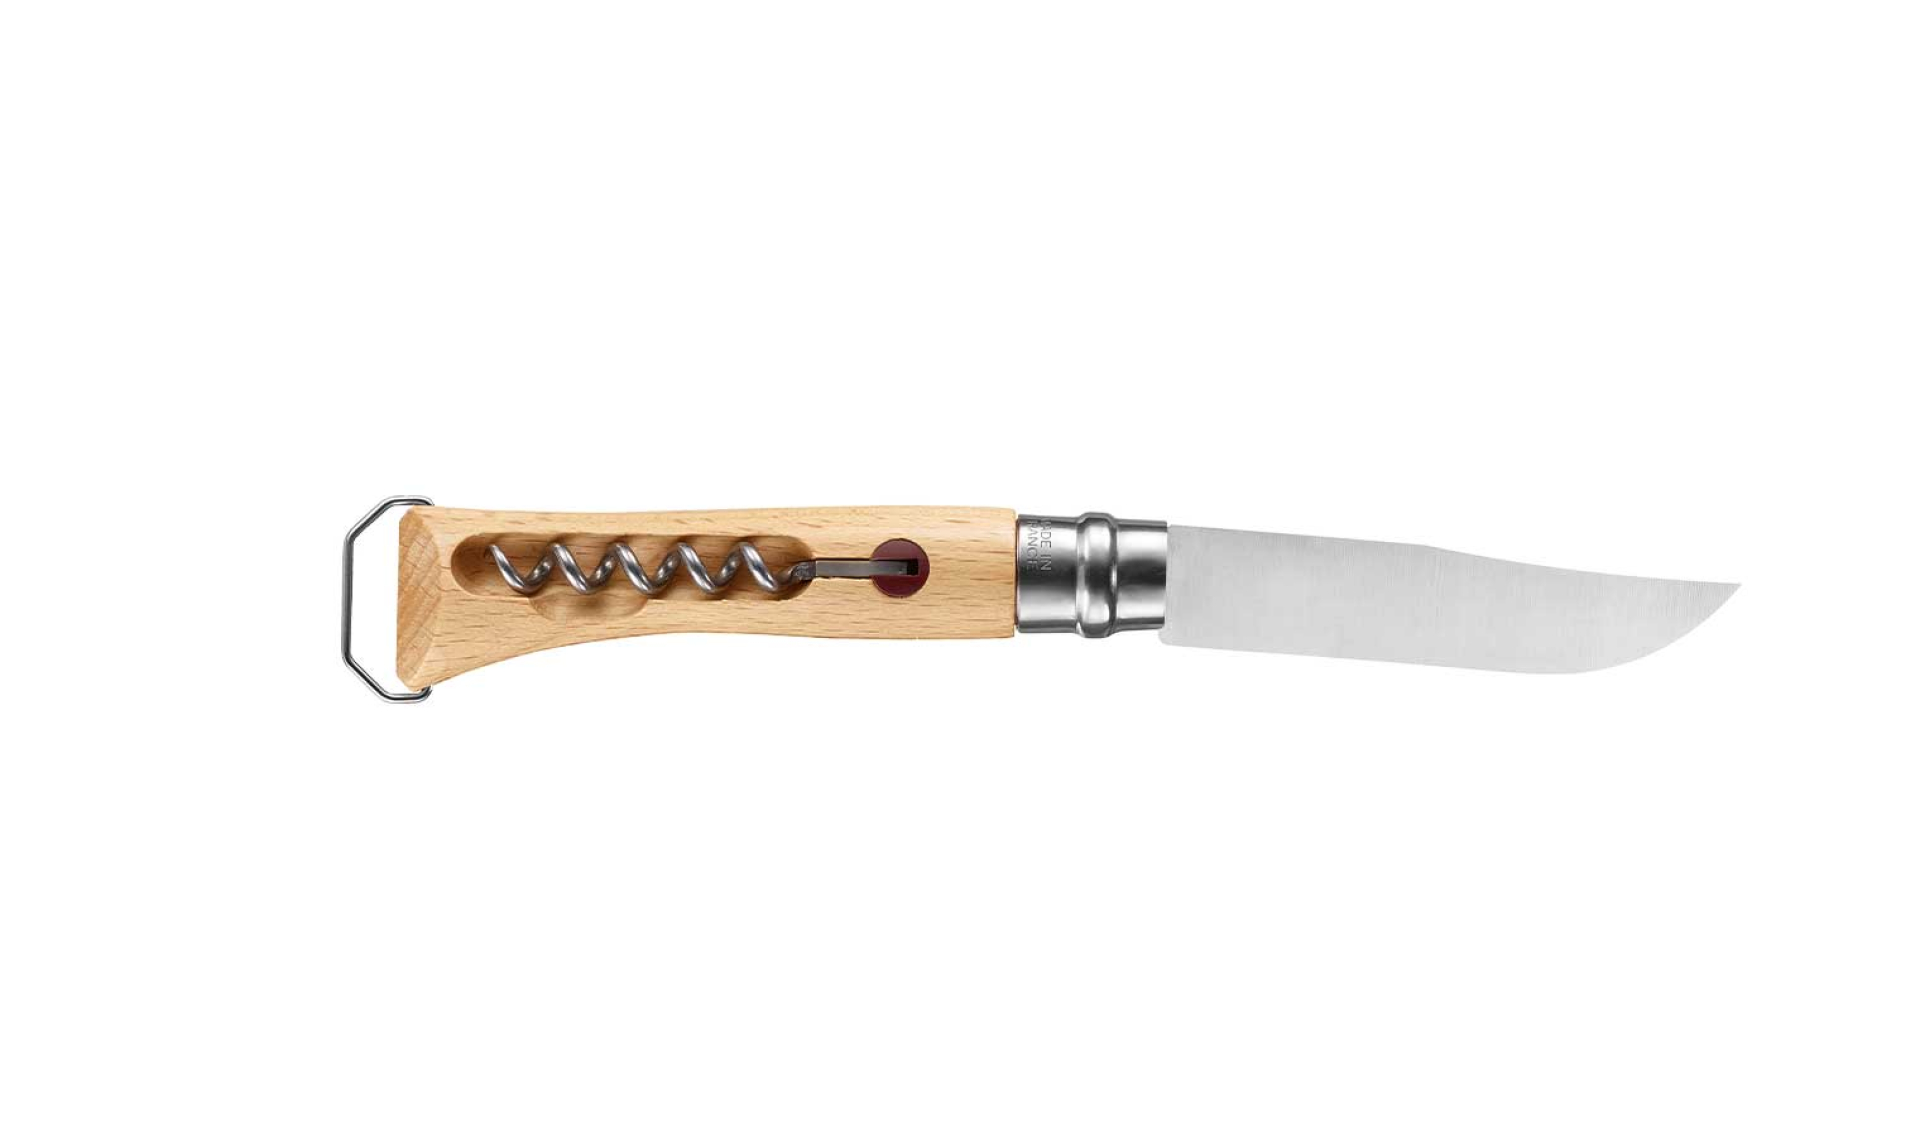 Couteau Opinel tire-bouchon n°10 lame inox